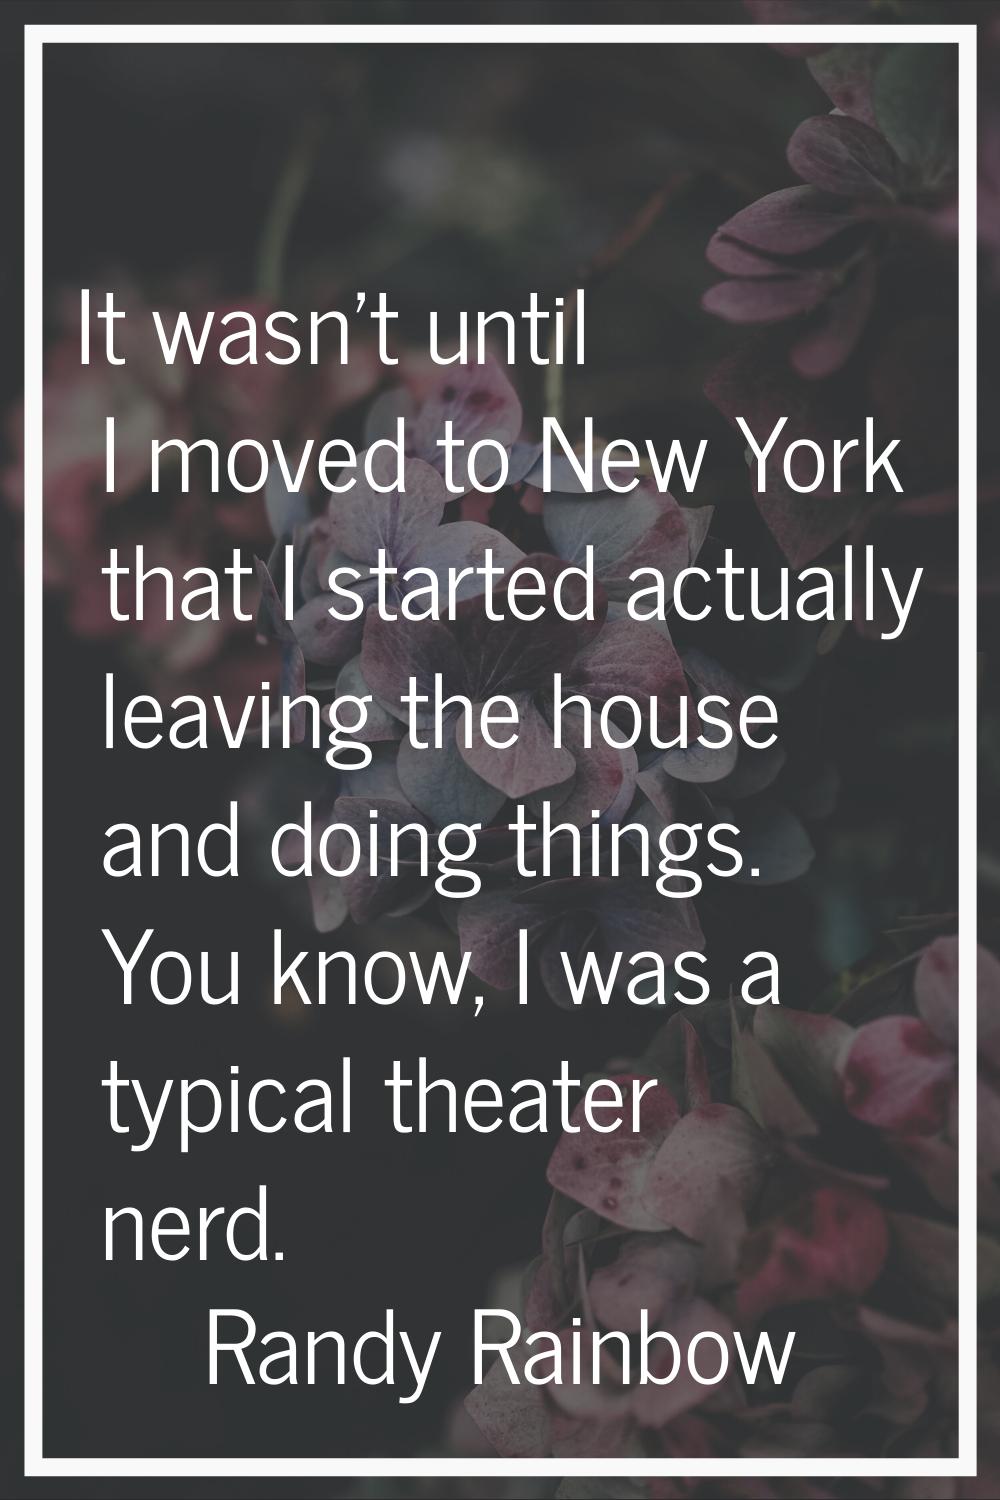 It wasn't until I moved to New York that I started actually leaving the house and doing things. You